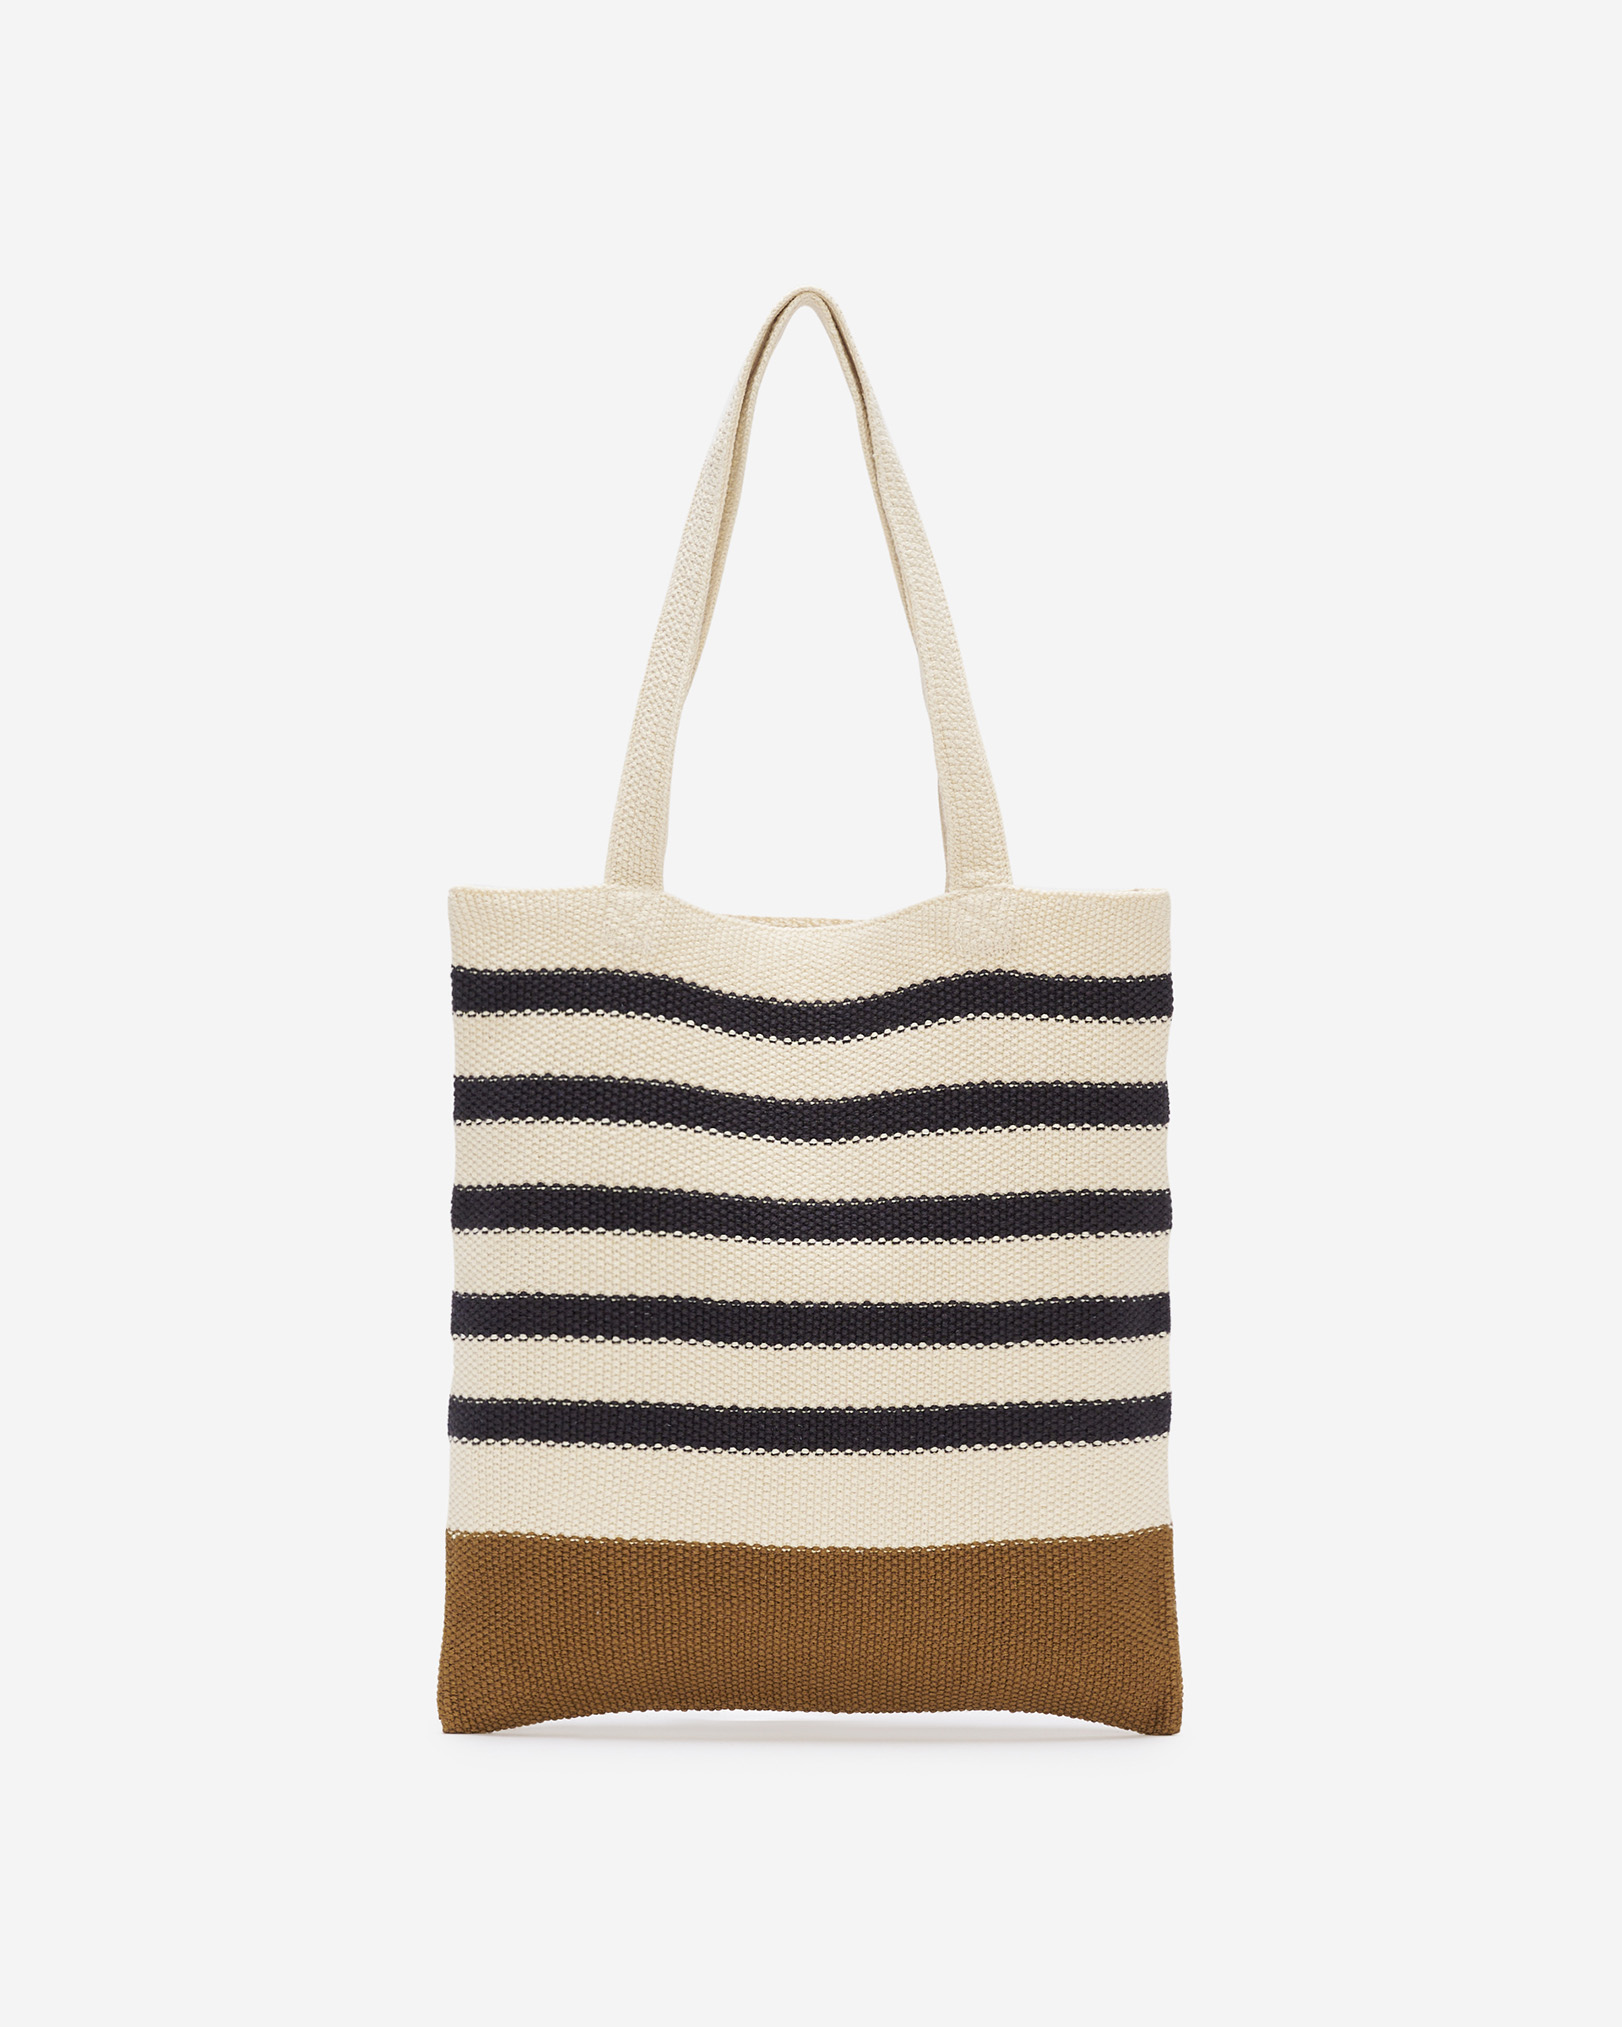 Roots Colwood Crochet Tote Bag in Black/White